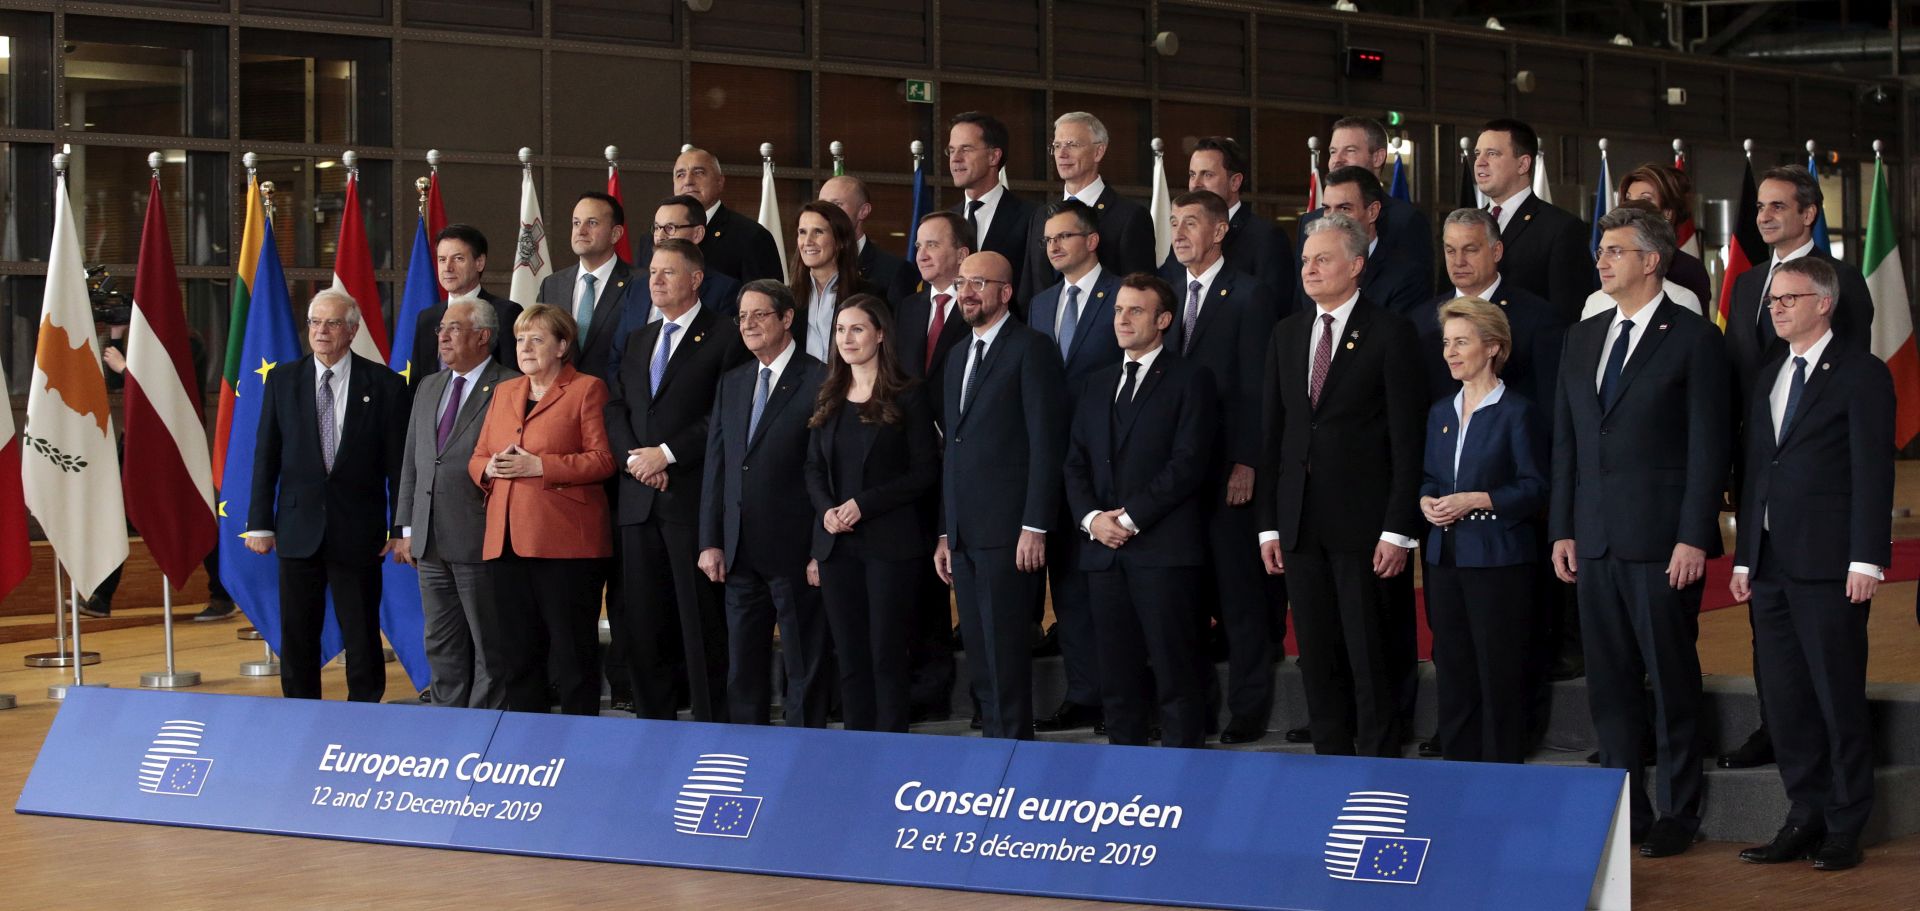 epa08066205 European leaders pose for a family picture during the European Council summit in Brussels, Belgium, 12 December 2019. An European Council meeting will be held in Brussels on 12 and 13 December during which the EU27 leaders among other topics will discuss the Brexit and preparations for the negotiations on future EU-UK relations after the withdrawal as well as a revision of the European Stability Mechanism (ESM) Treaty.  EPA/OLIVIER HOSLET